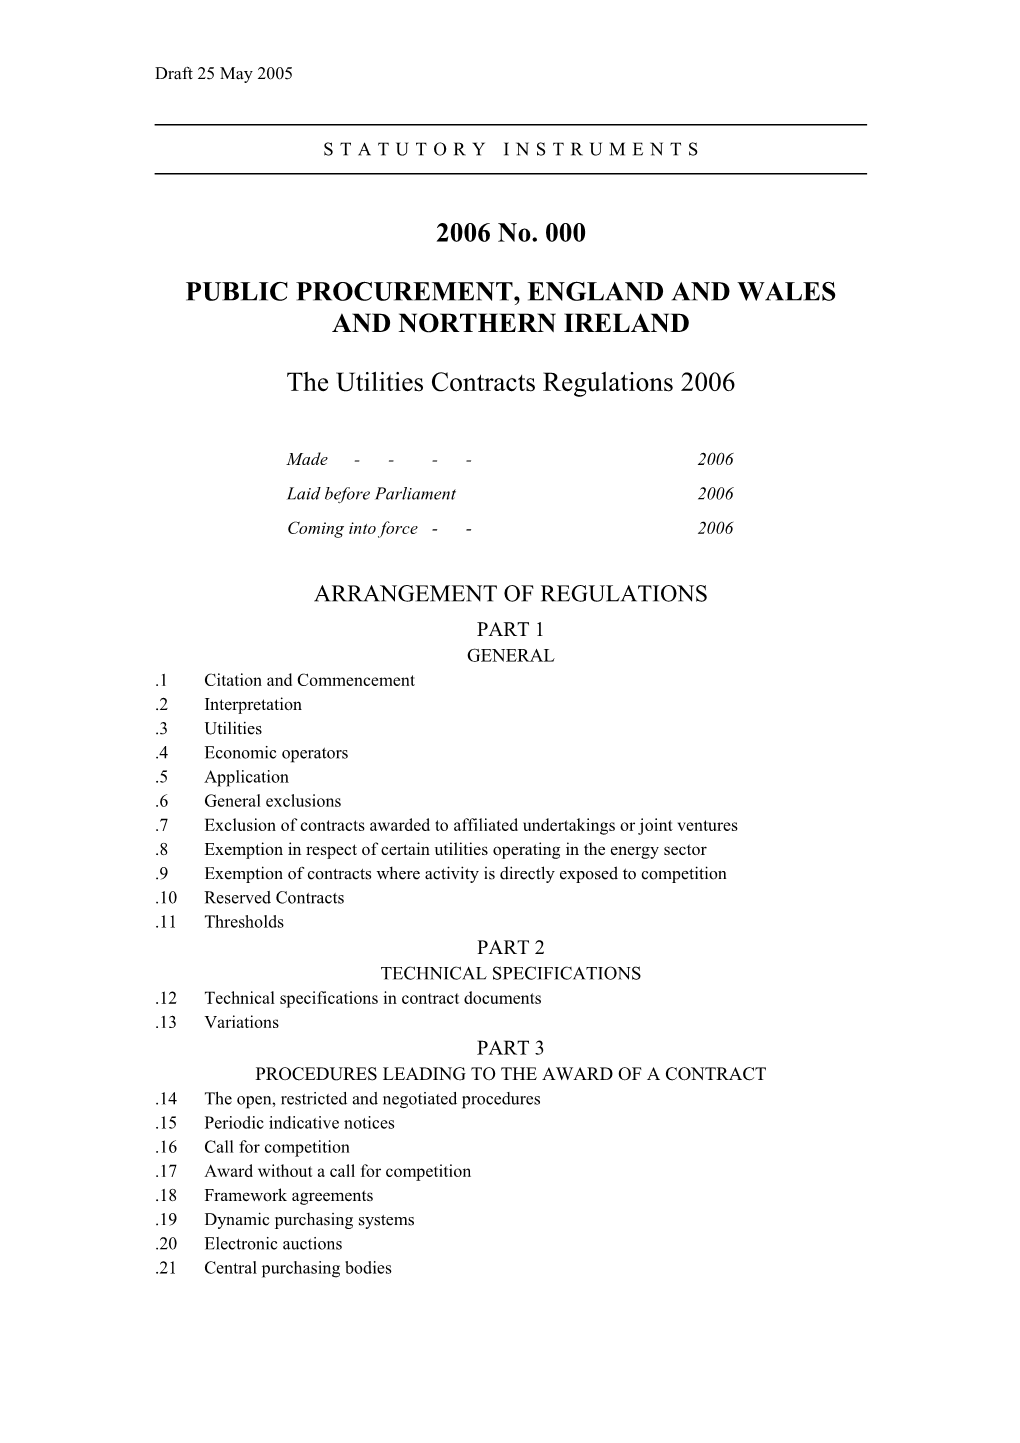 Public Procurement, England and Wales and Northern Ireland